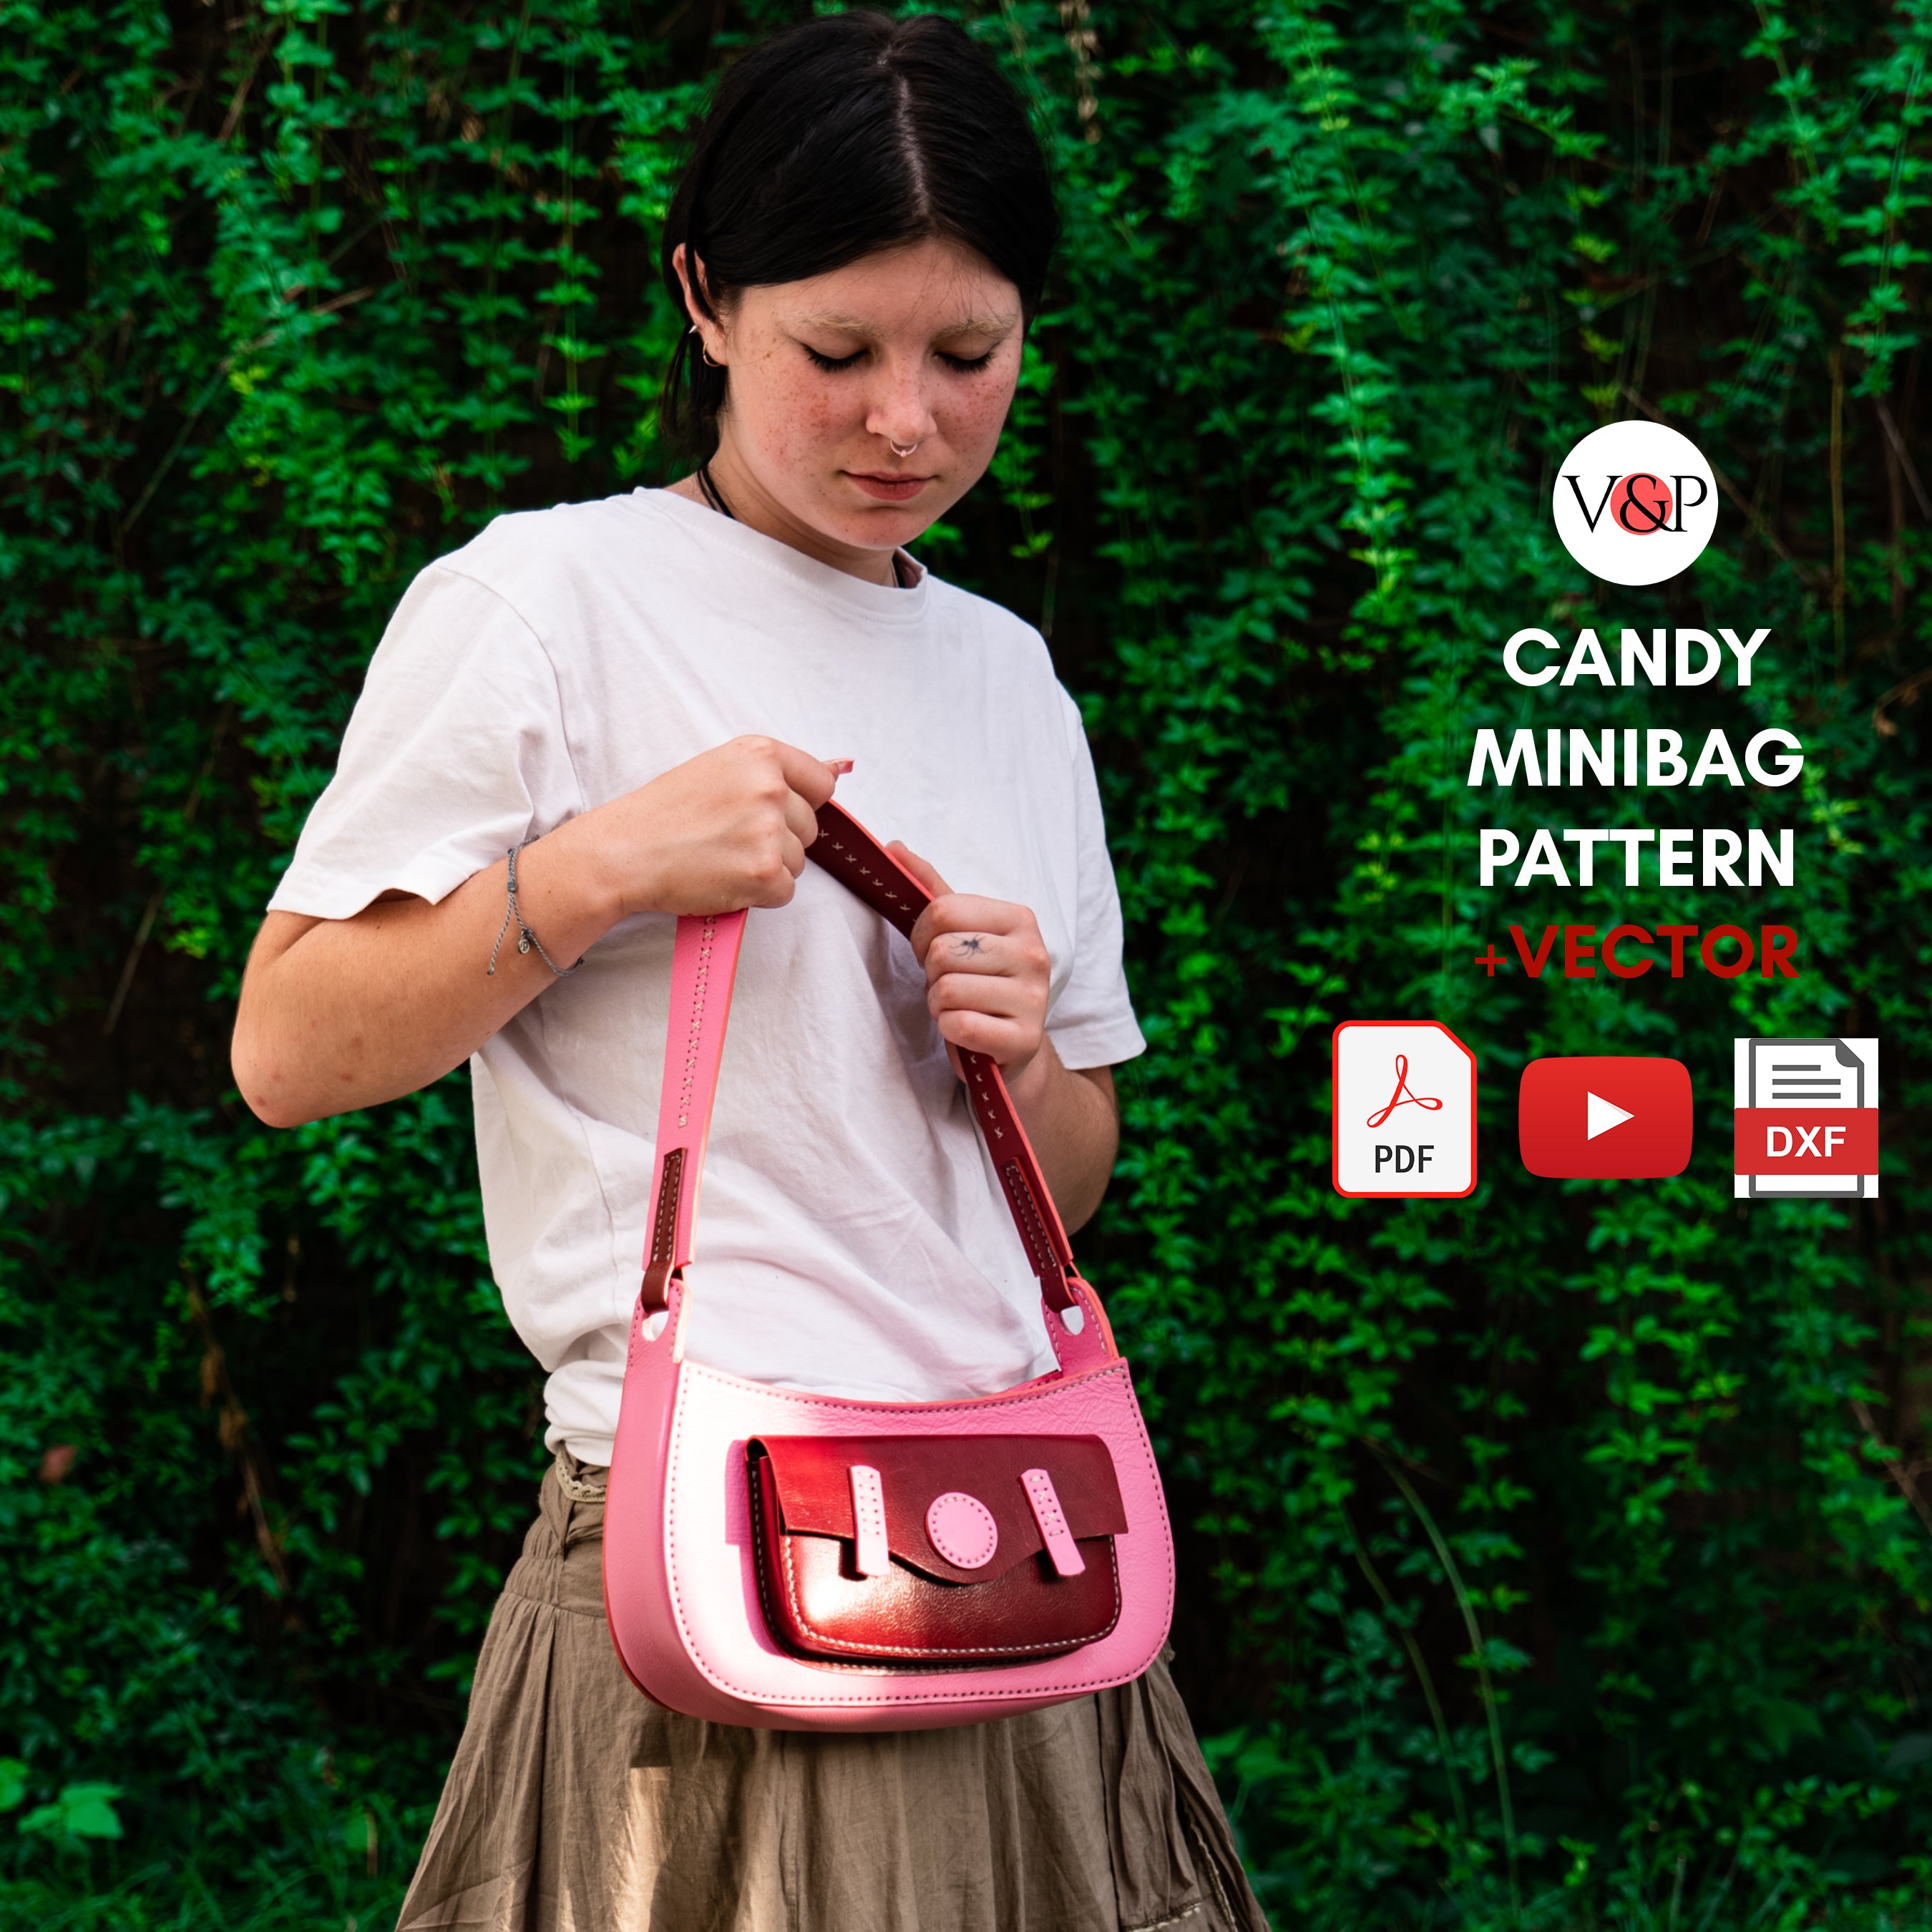 PDF Pattern, DXF File and Instructional Video for Candy Mini Bag